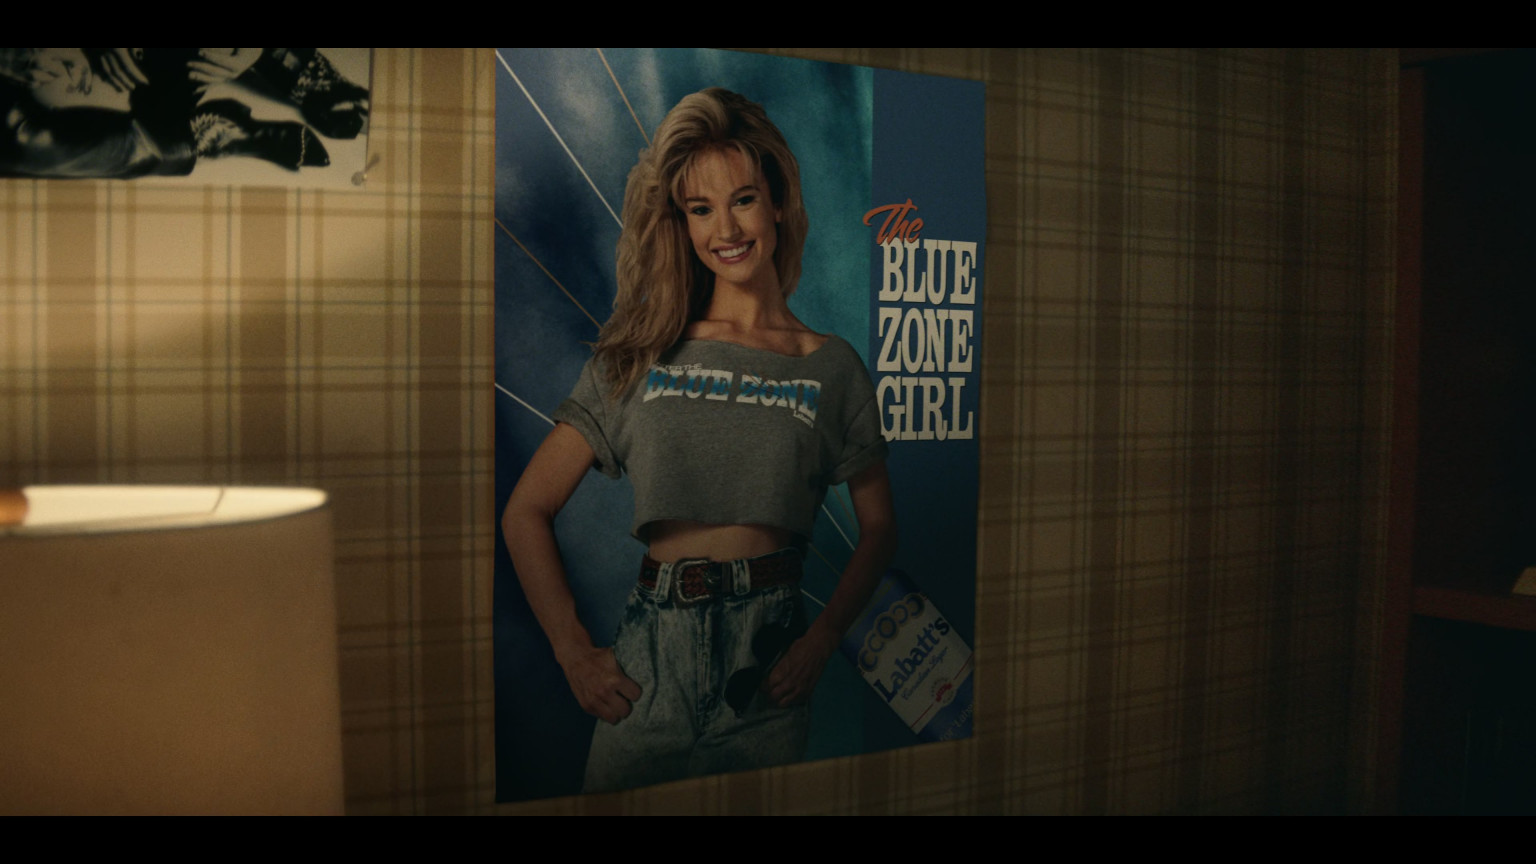 labatt-s-canadian-lager-the-blue-zone-girl-poster-starring-by-lily